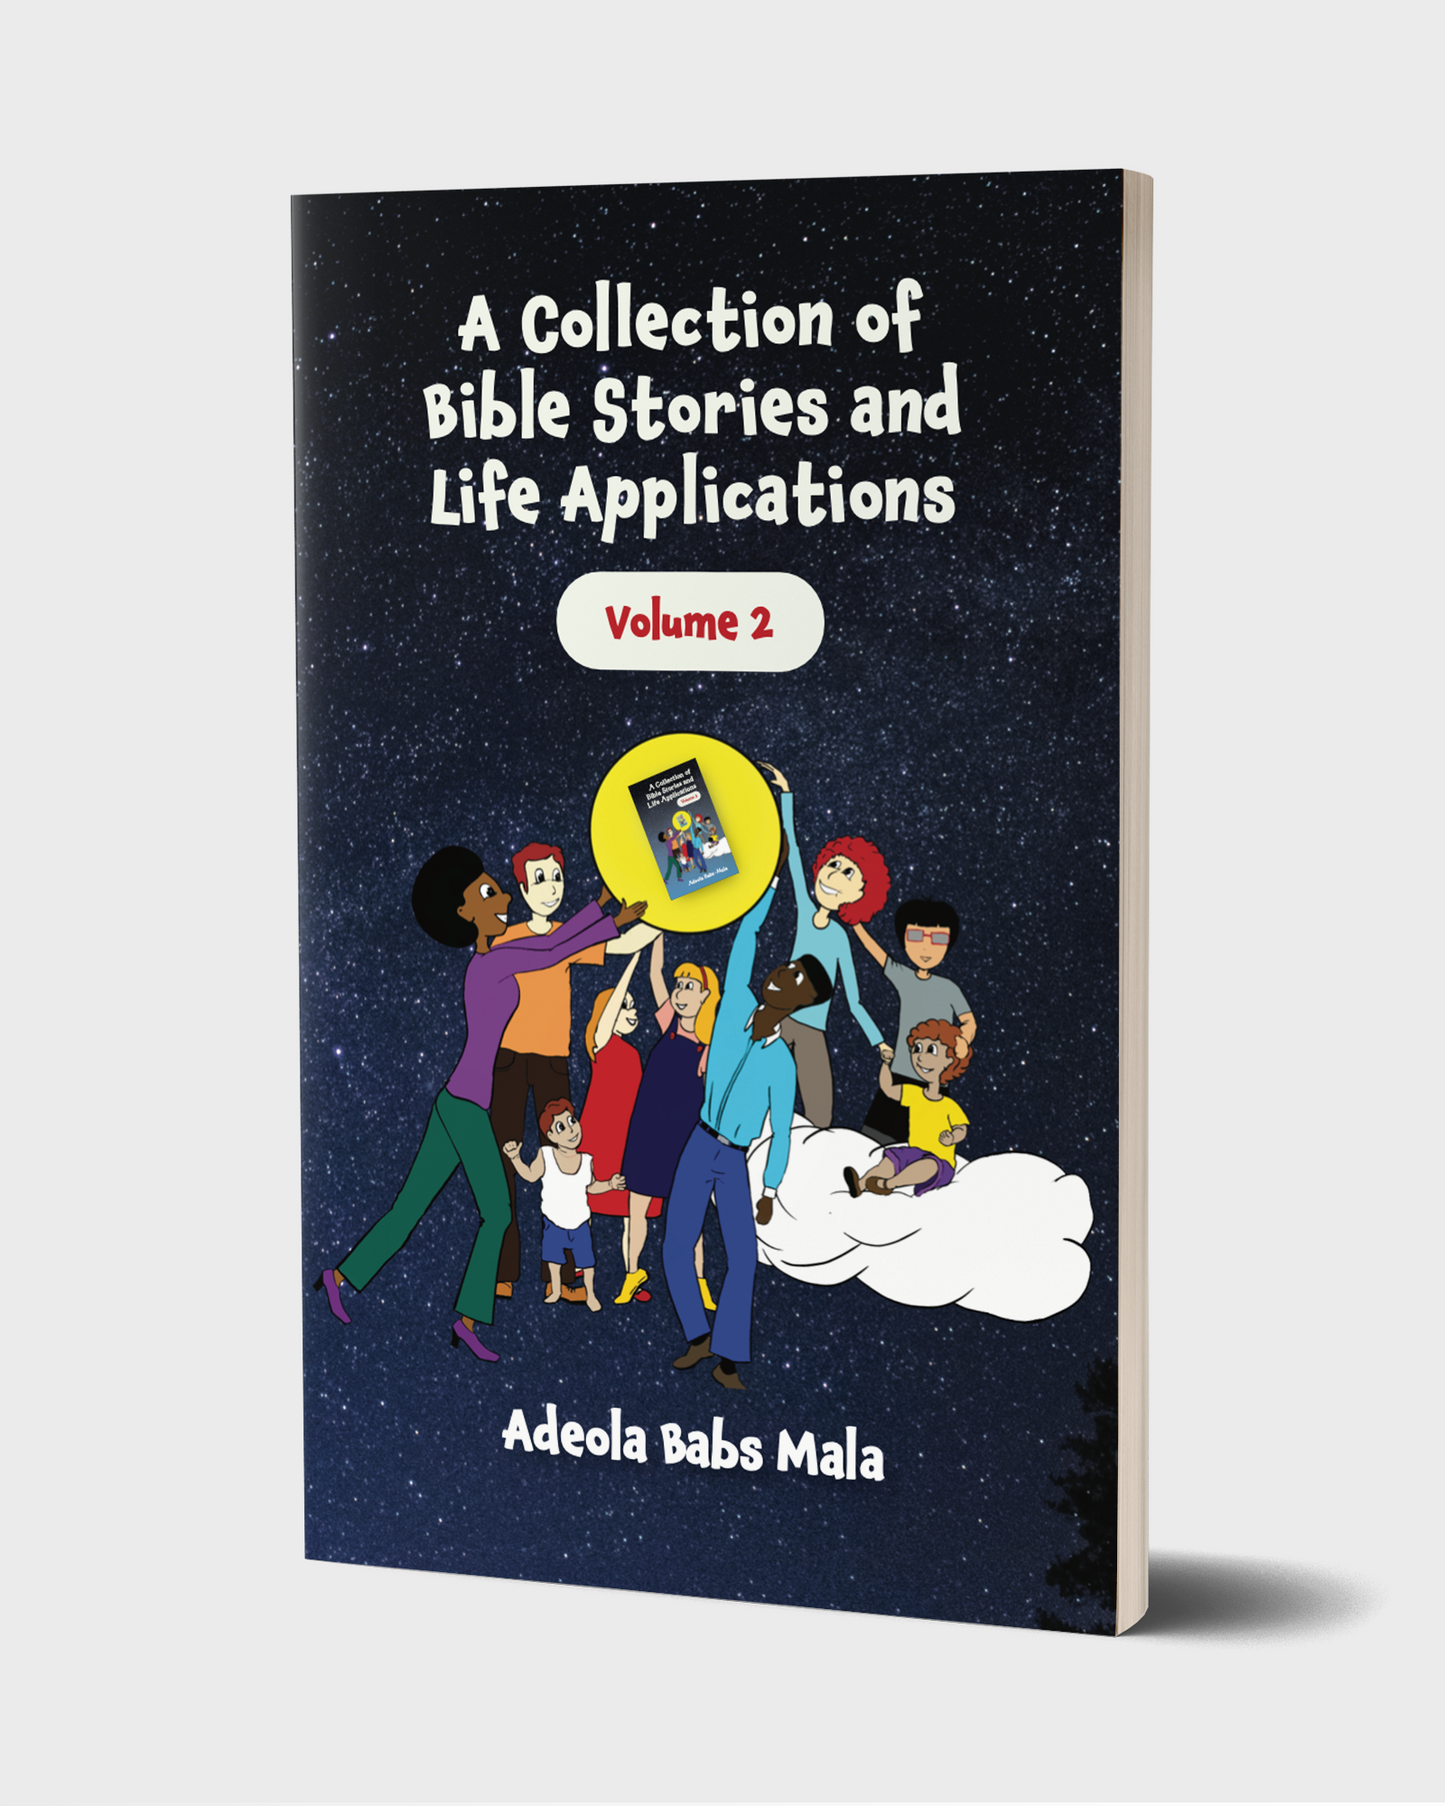 A Collection of Bible Stories and Practical Life Applications